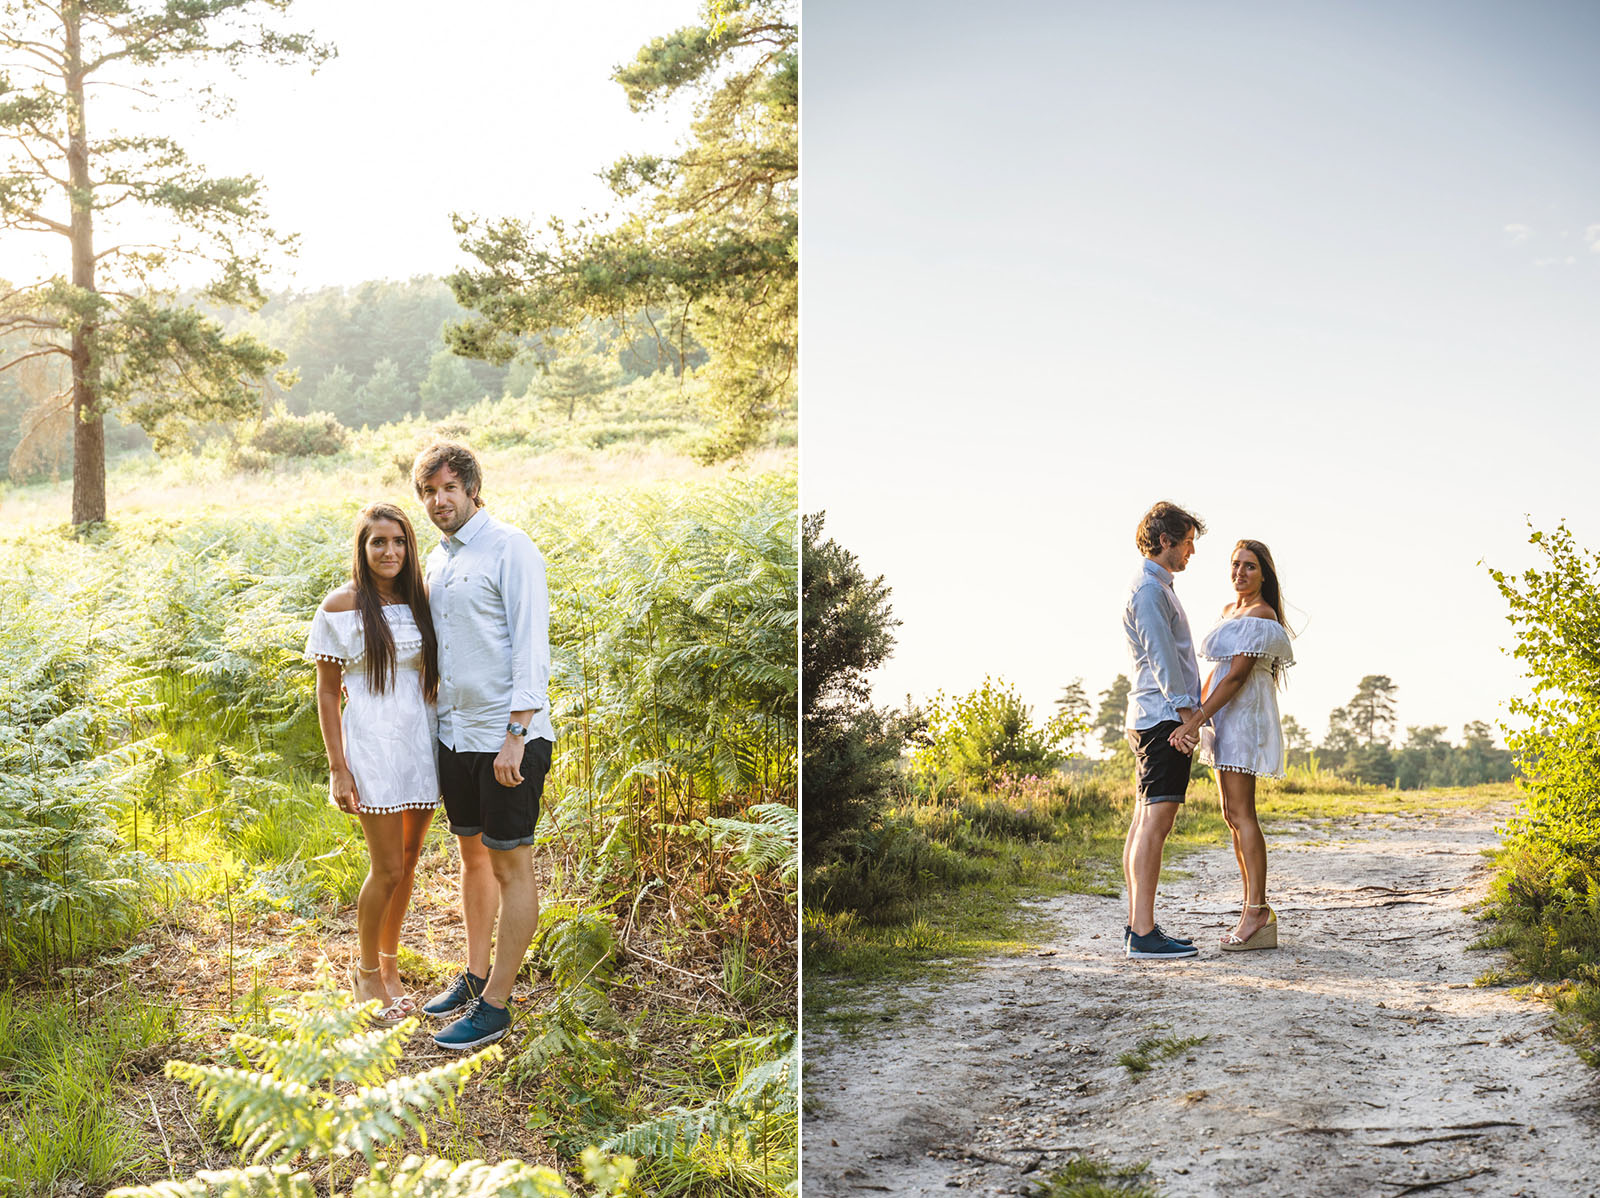 Contemporary Engagement photography Surrey